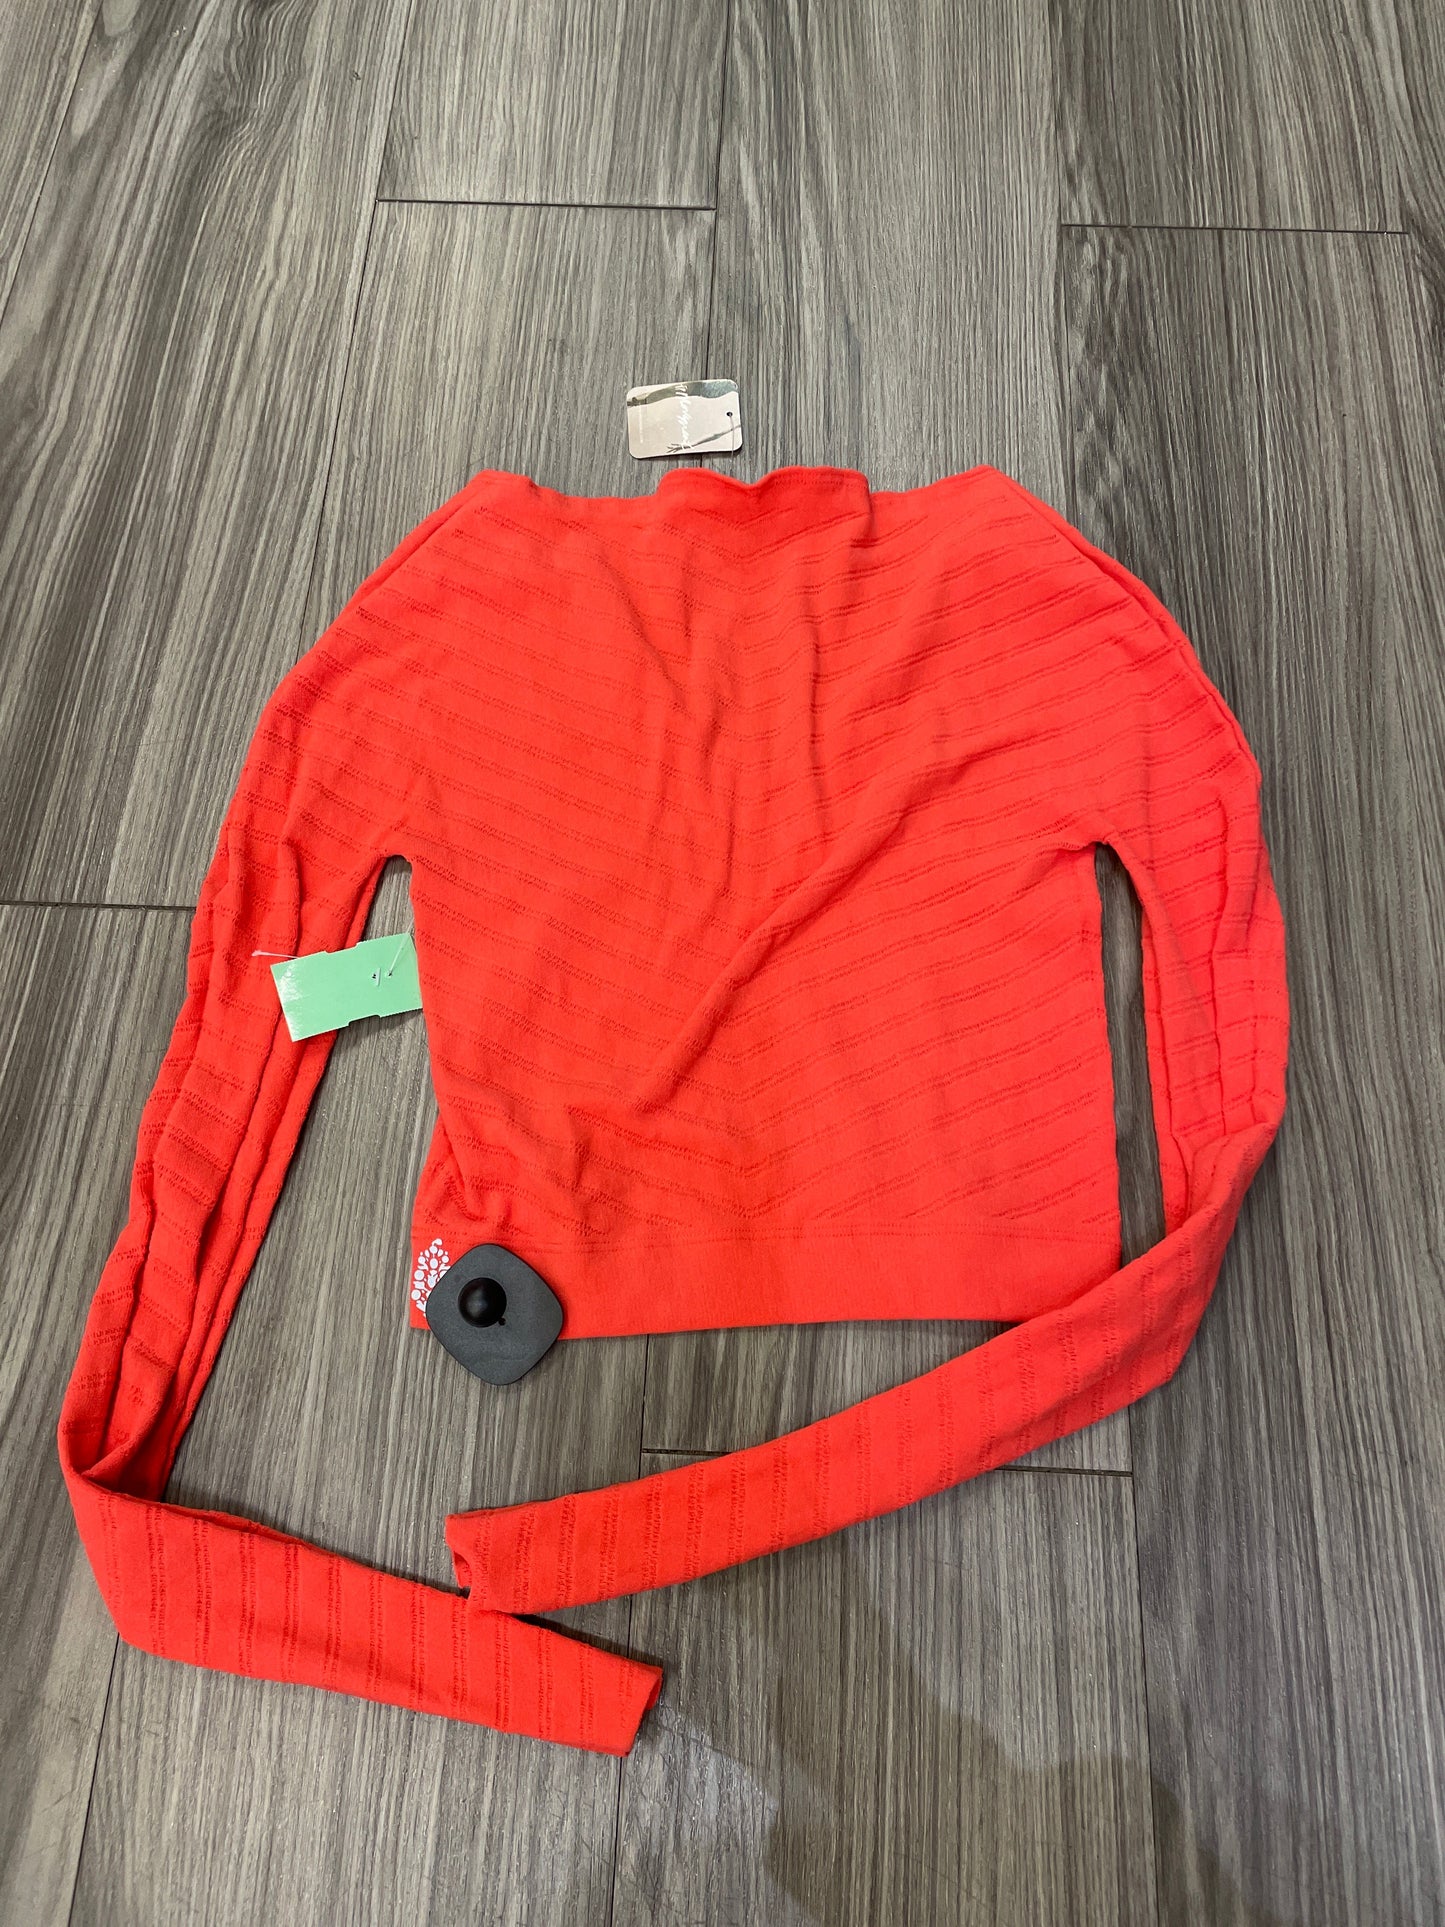 Coral Top Long Sleeve Free People, Size M